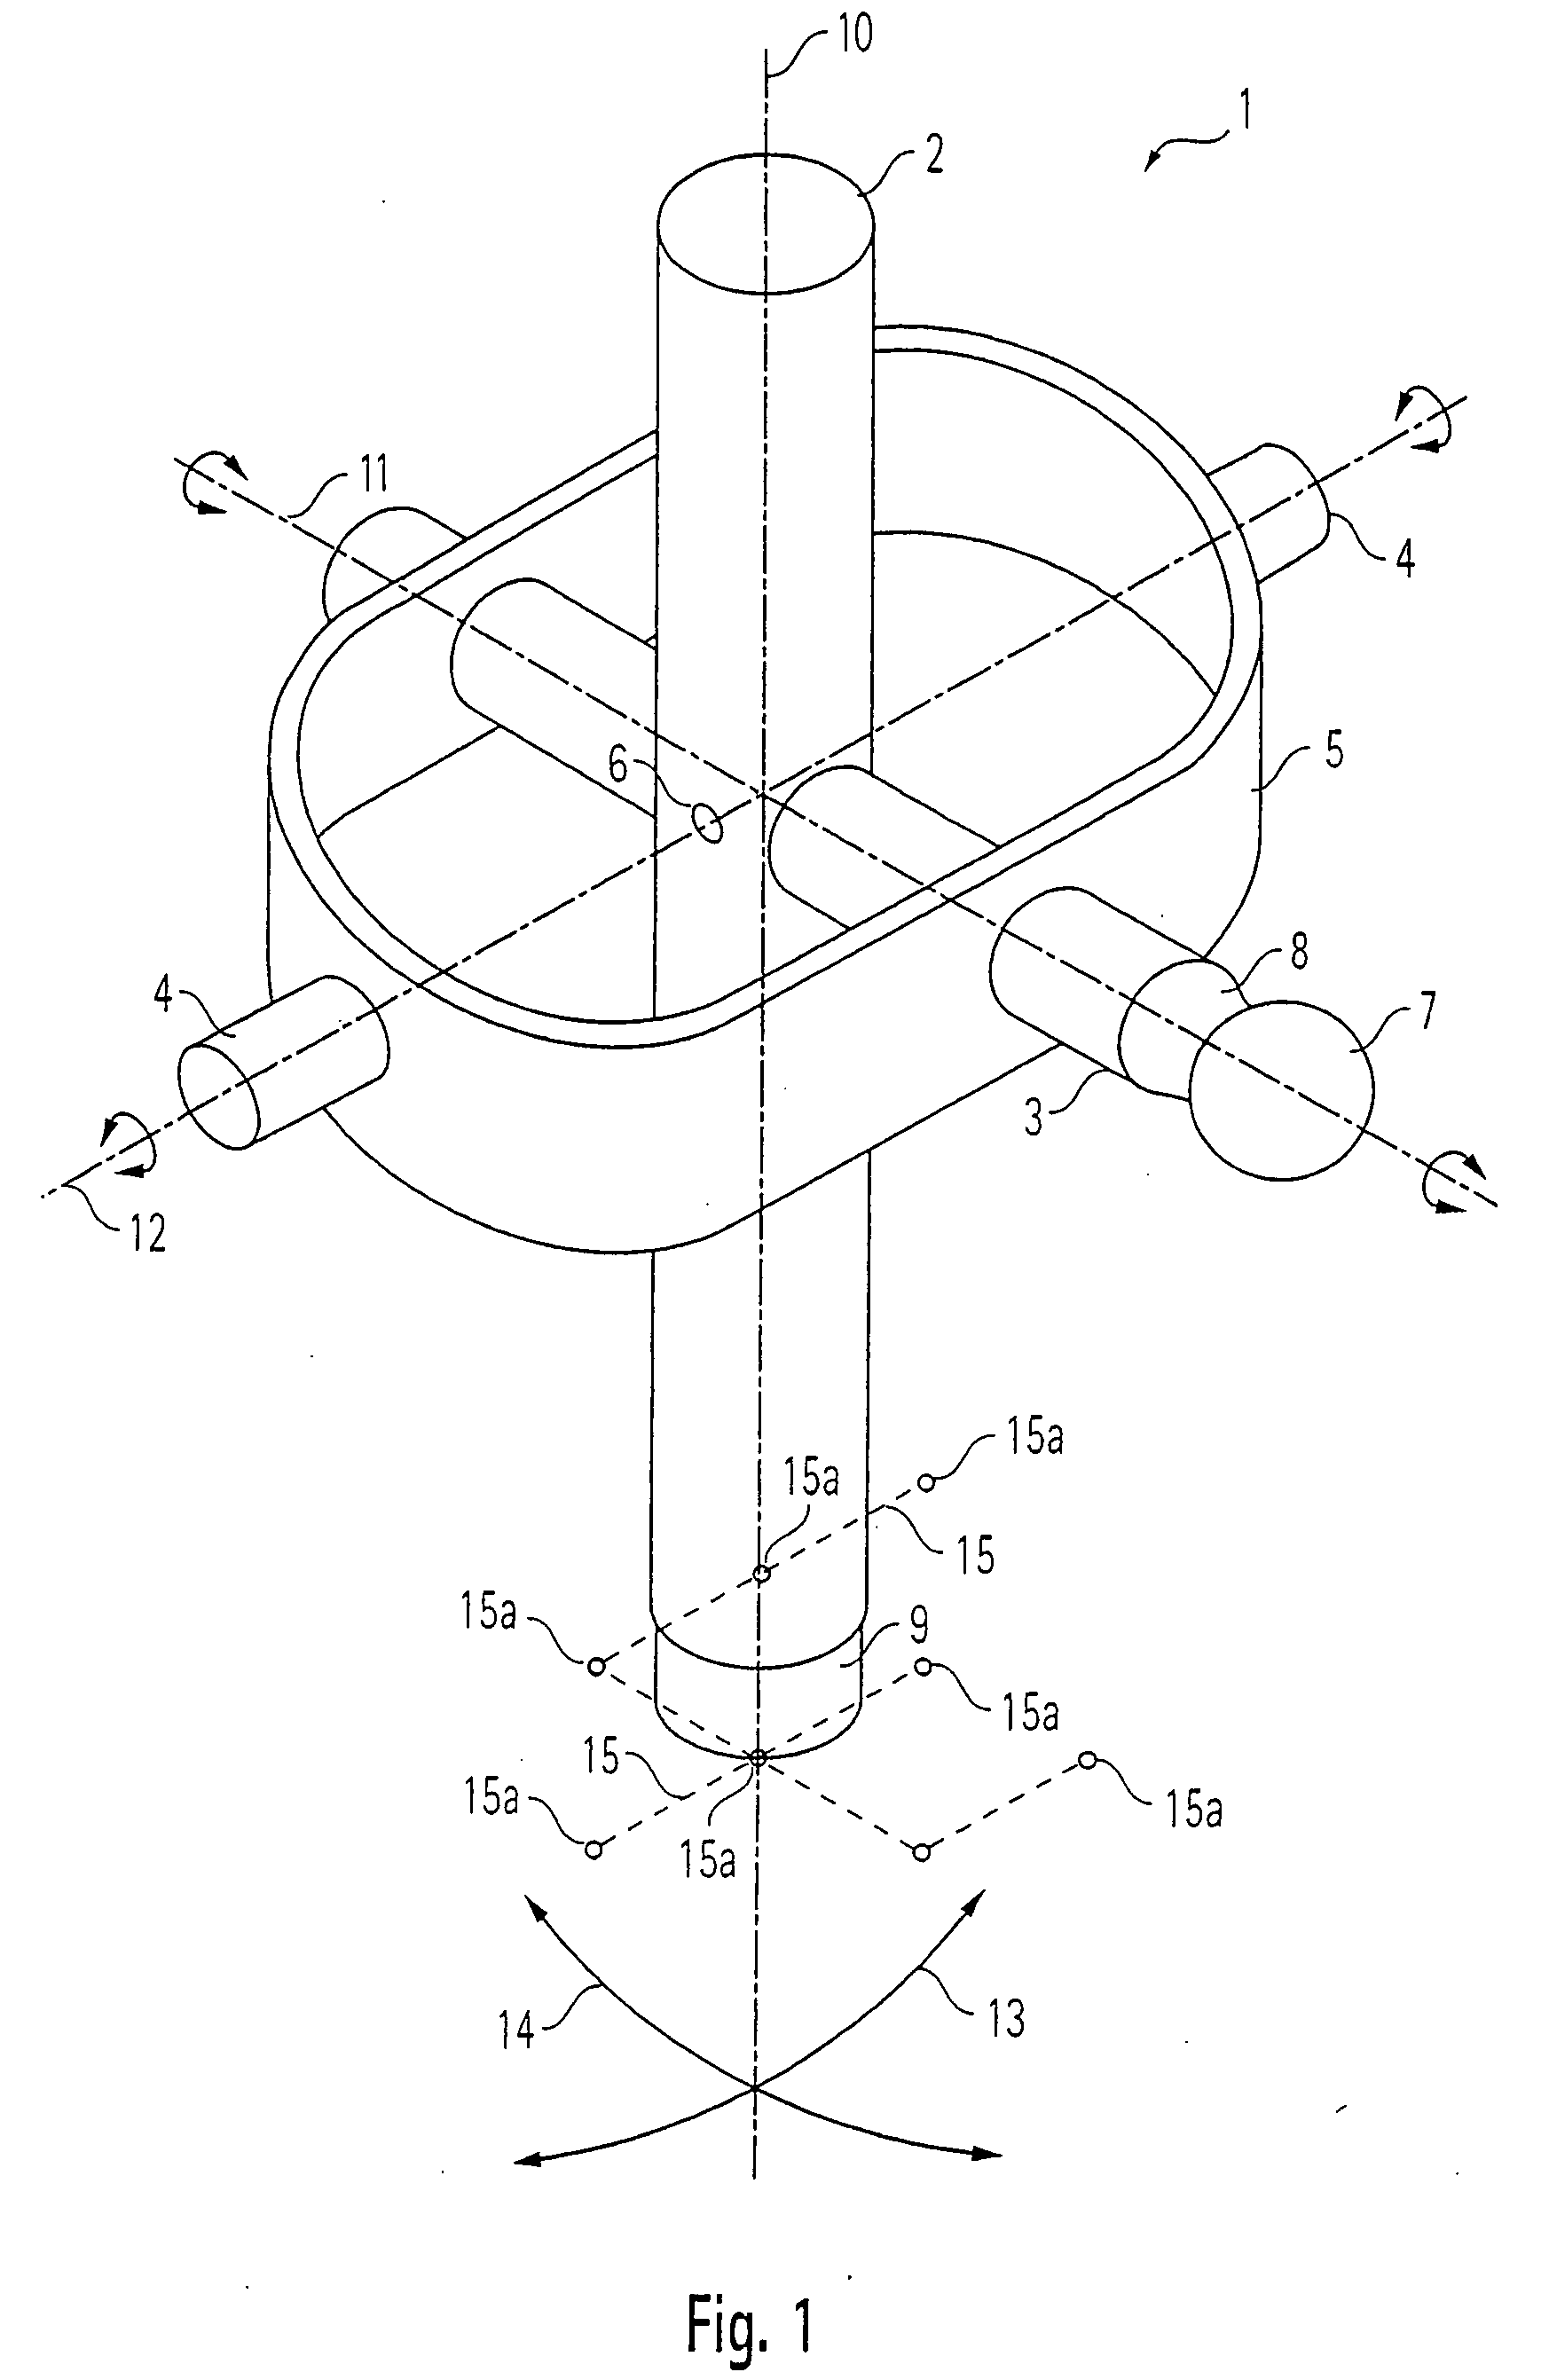 Movement converter for an isodistant shifting sensor system